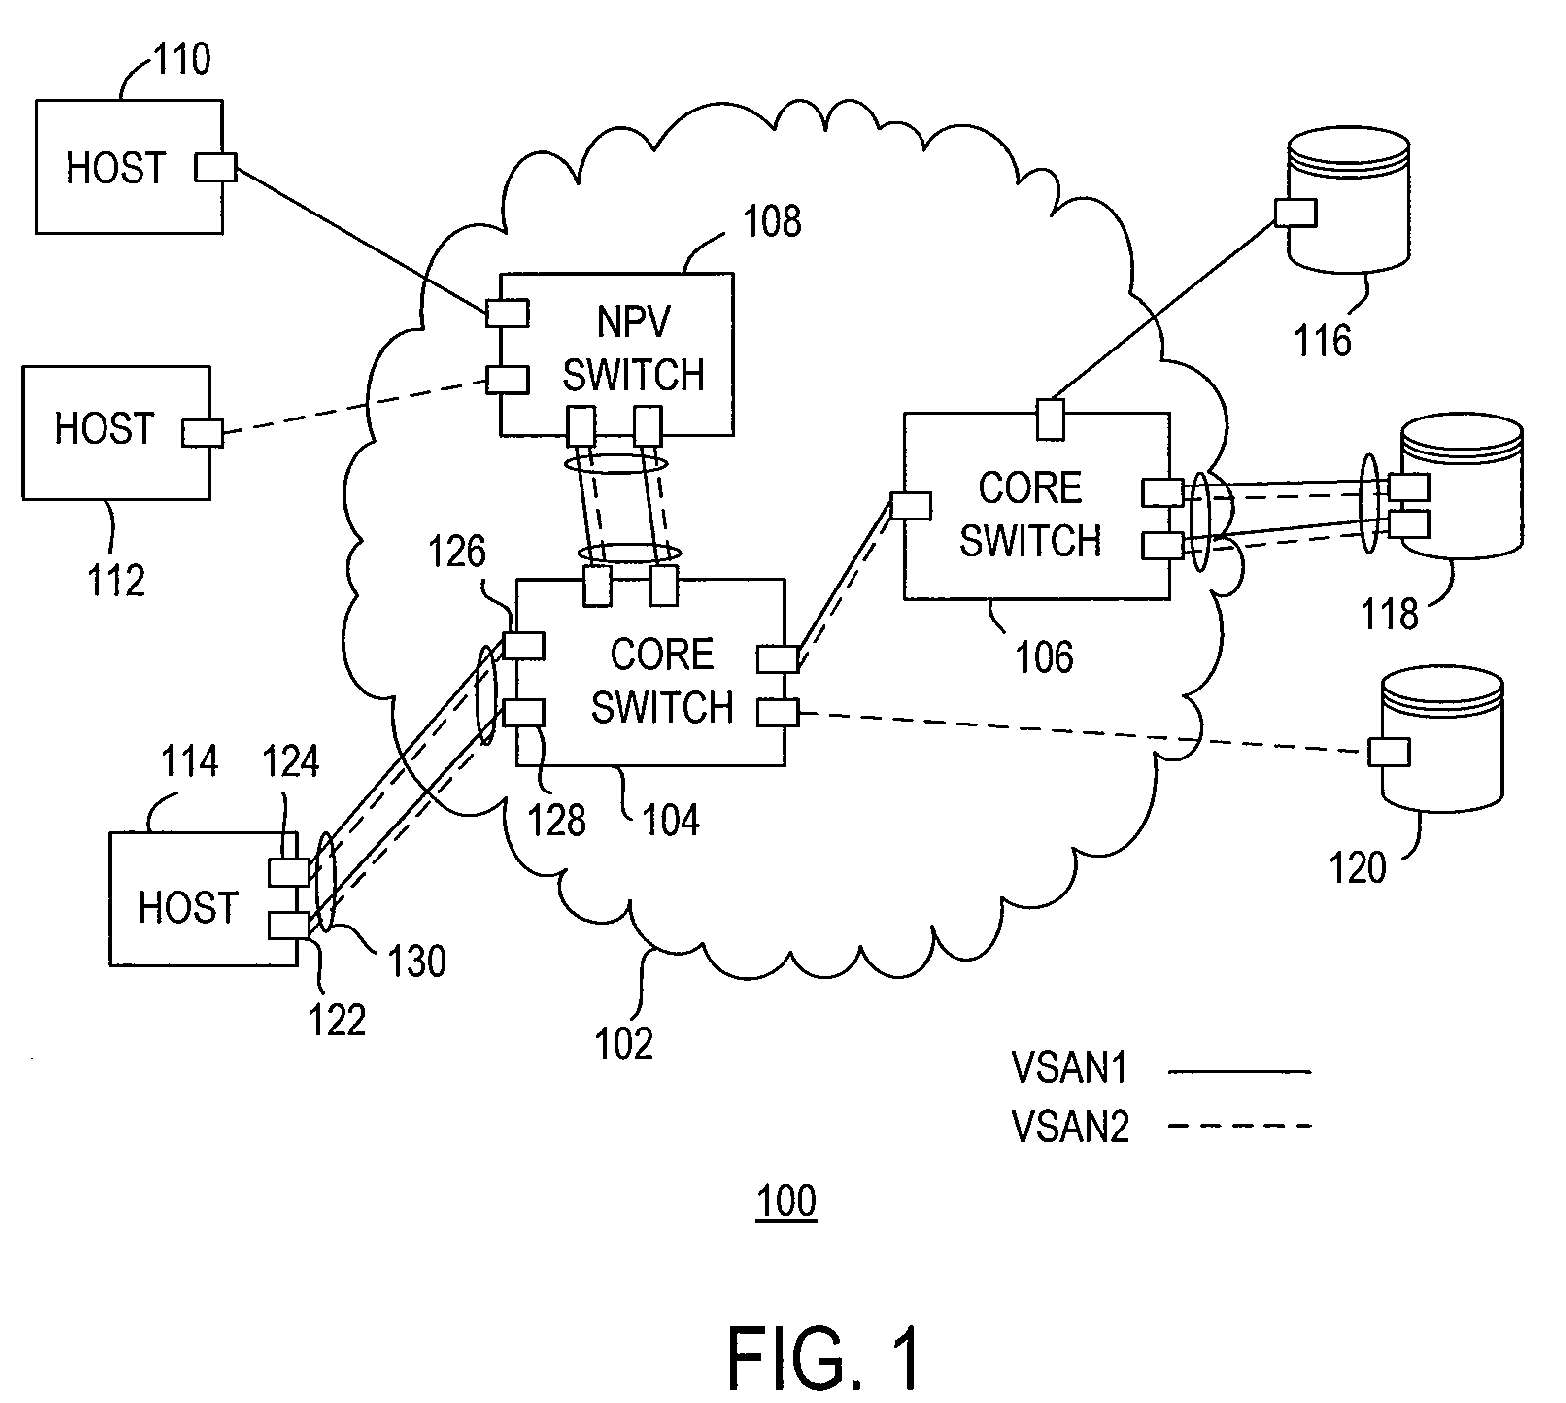 Trunking with port aggregation for fabric ports in a fibre channel fabric and attached devices